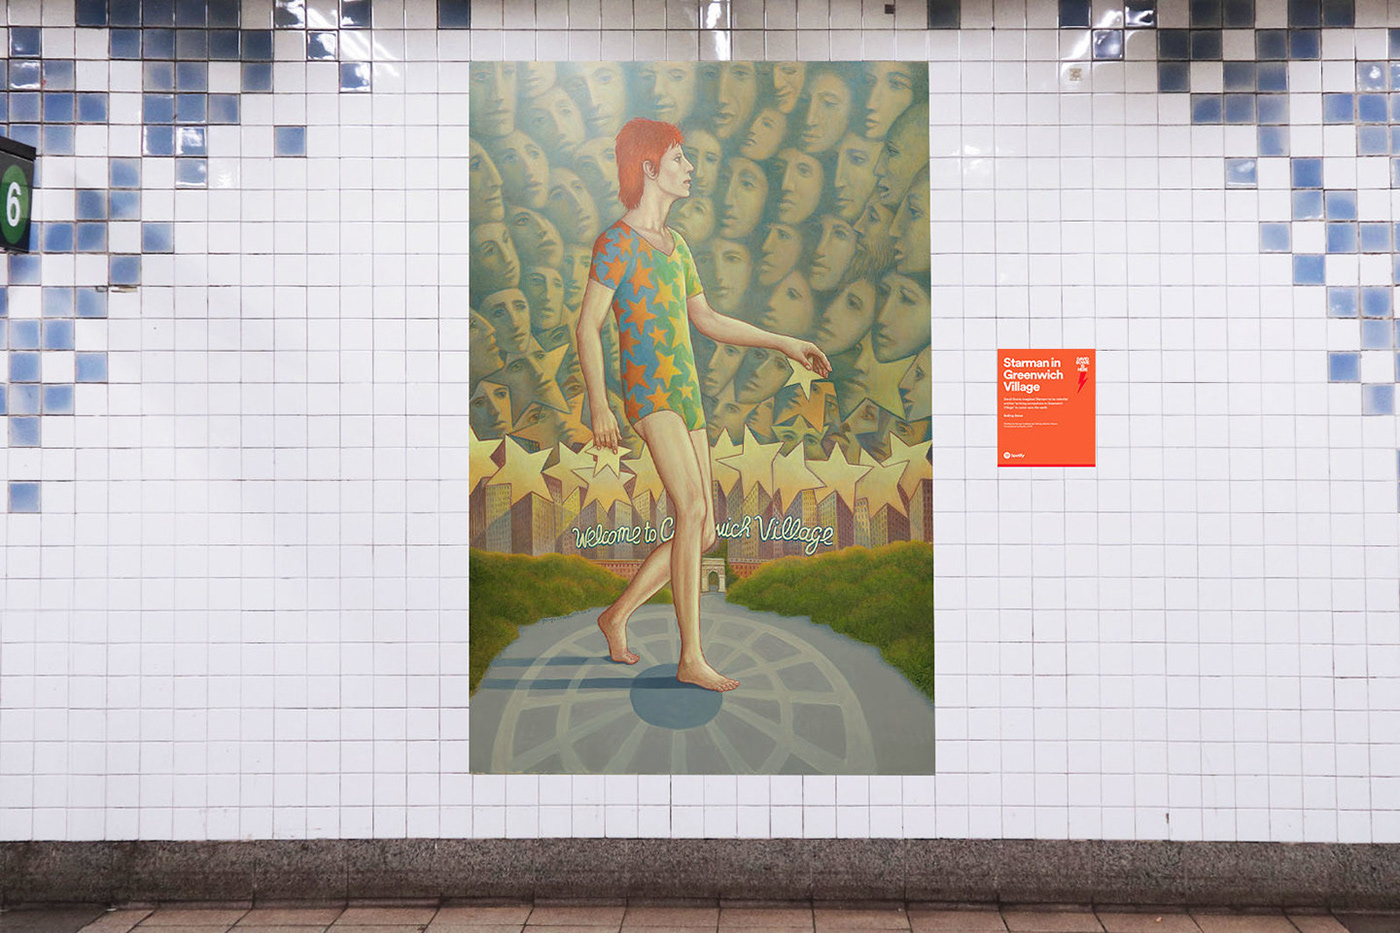 spotify music david bowie New York Exhibition  Photography  museum subway art nyc